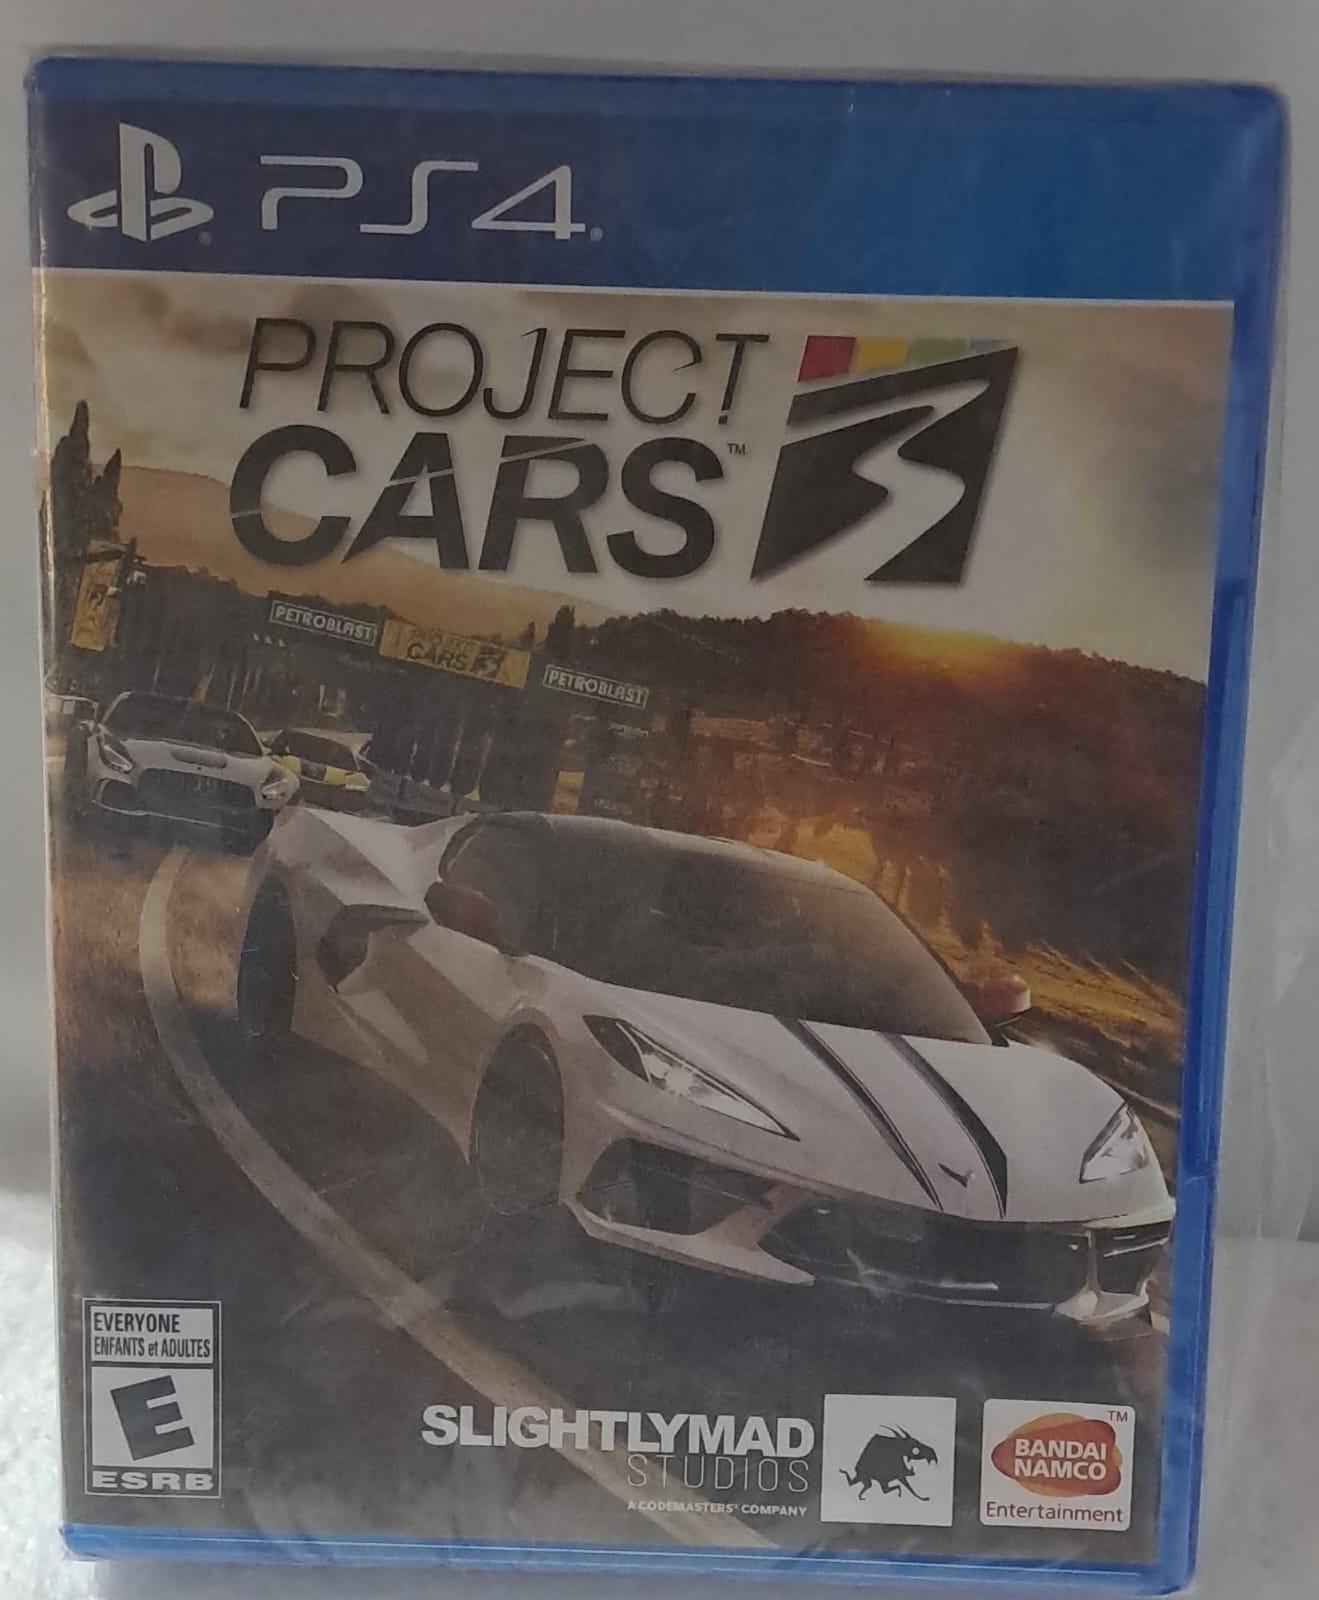 Juego Ps4 Project Cars 3